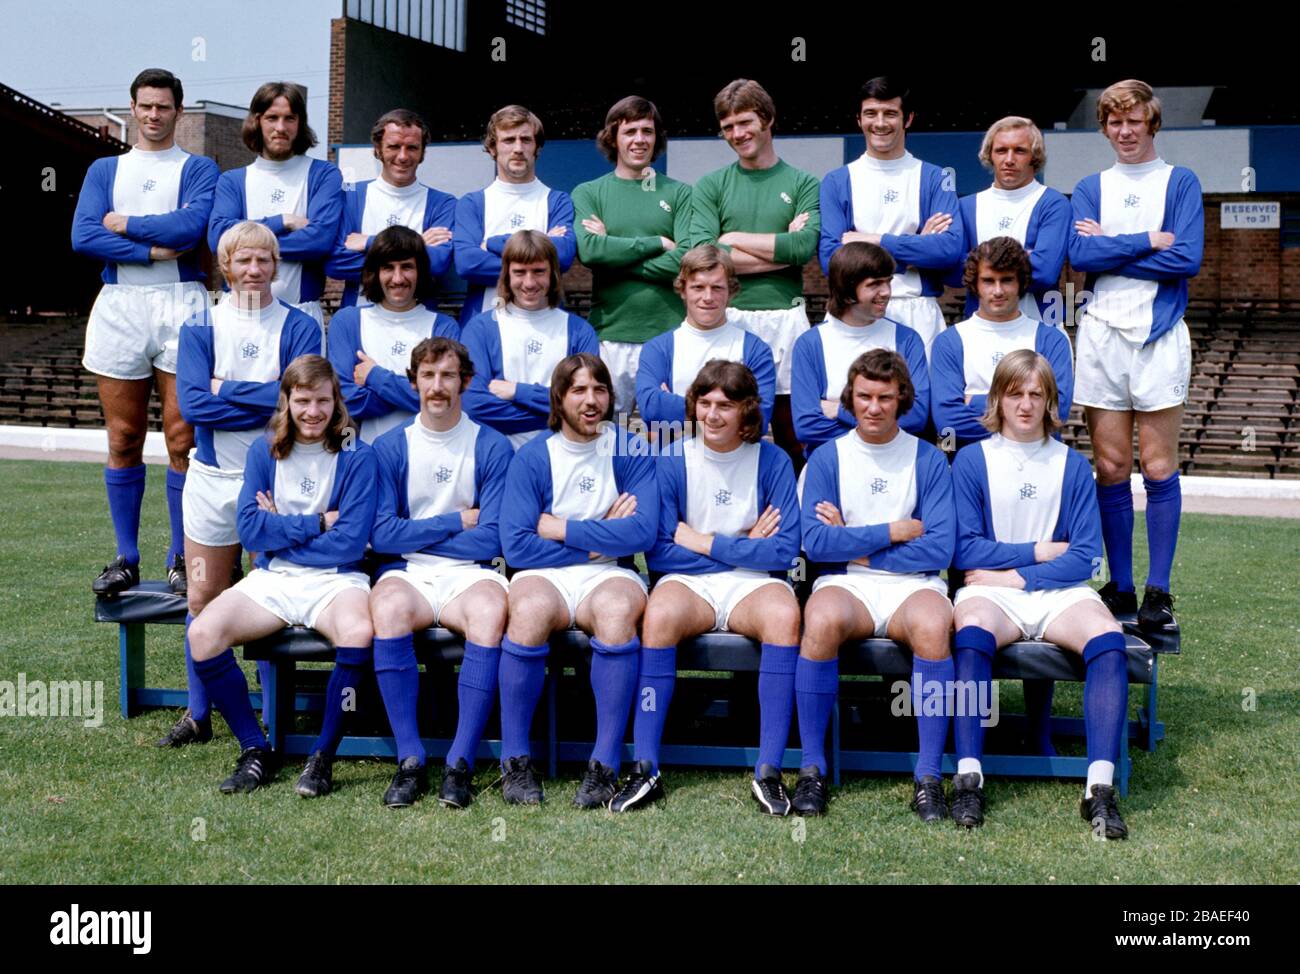 back row (l-r)  Roger Hynd, Alan Whitehead, Tommy Carroll, Ray Martin, Paul Cooper, Mike Kelly, Stan Harland,, Tony Want, David Robinson. middle row: George Smith, Alan Campbell, Gary Pendrey, Gordon Taylor, Bobby Hope, Malcolm Page. front row  Steve Phillips, Bob Hatton, Bob Latchford, Trevor Francis, Phil Summerill, Kenny Burns. Stock Photo